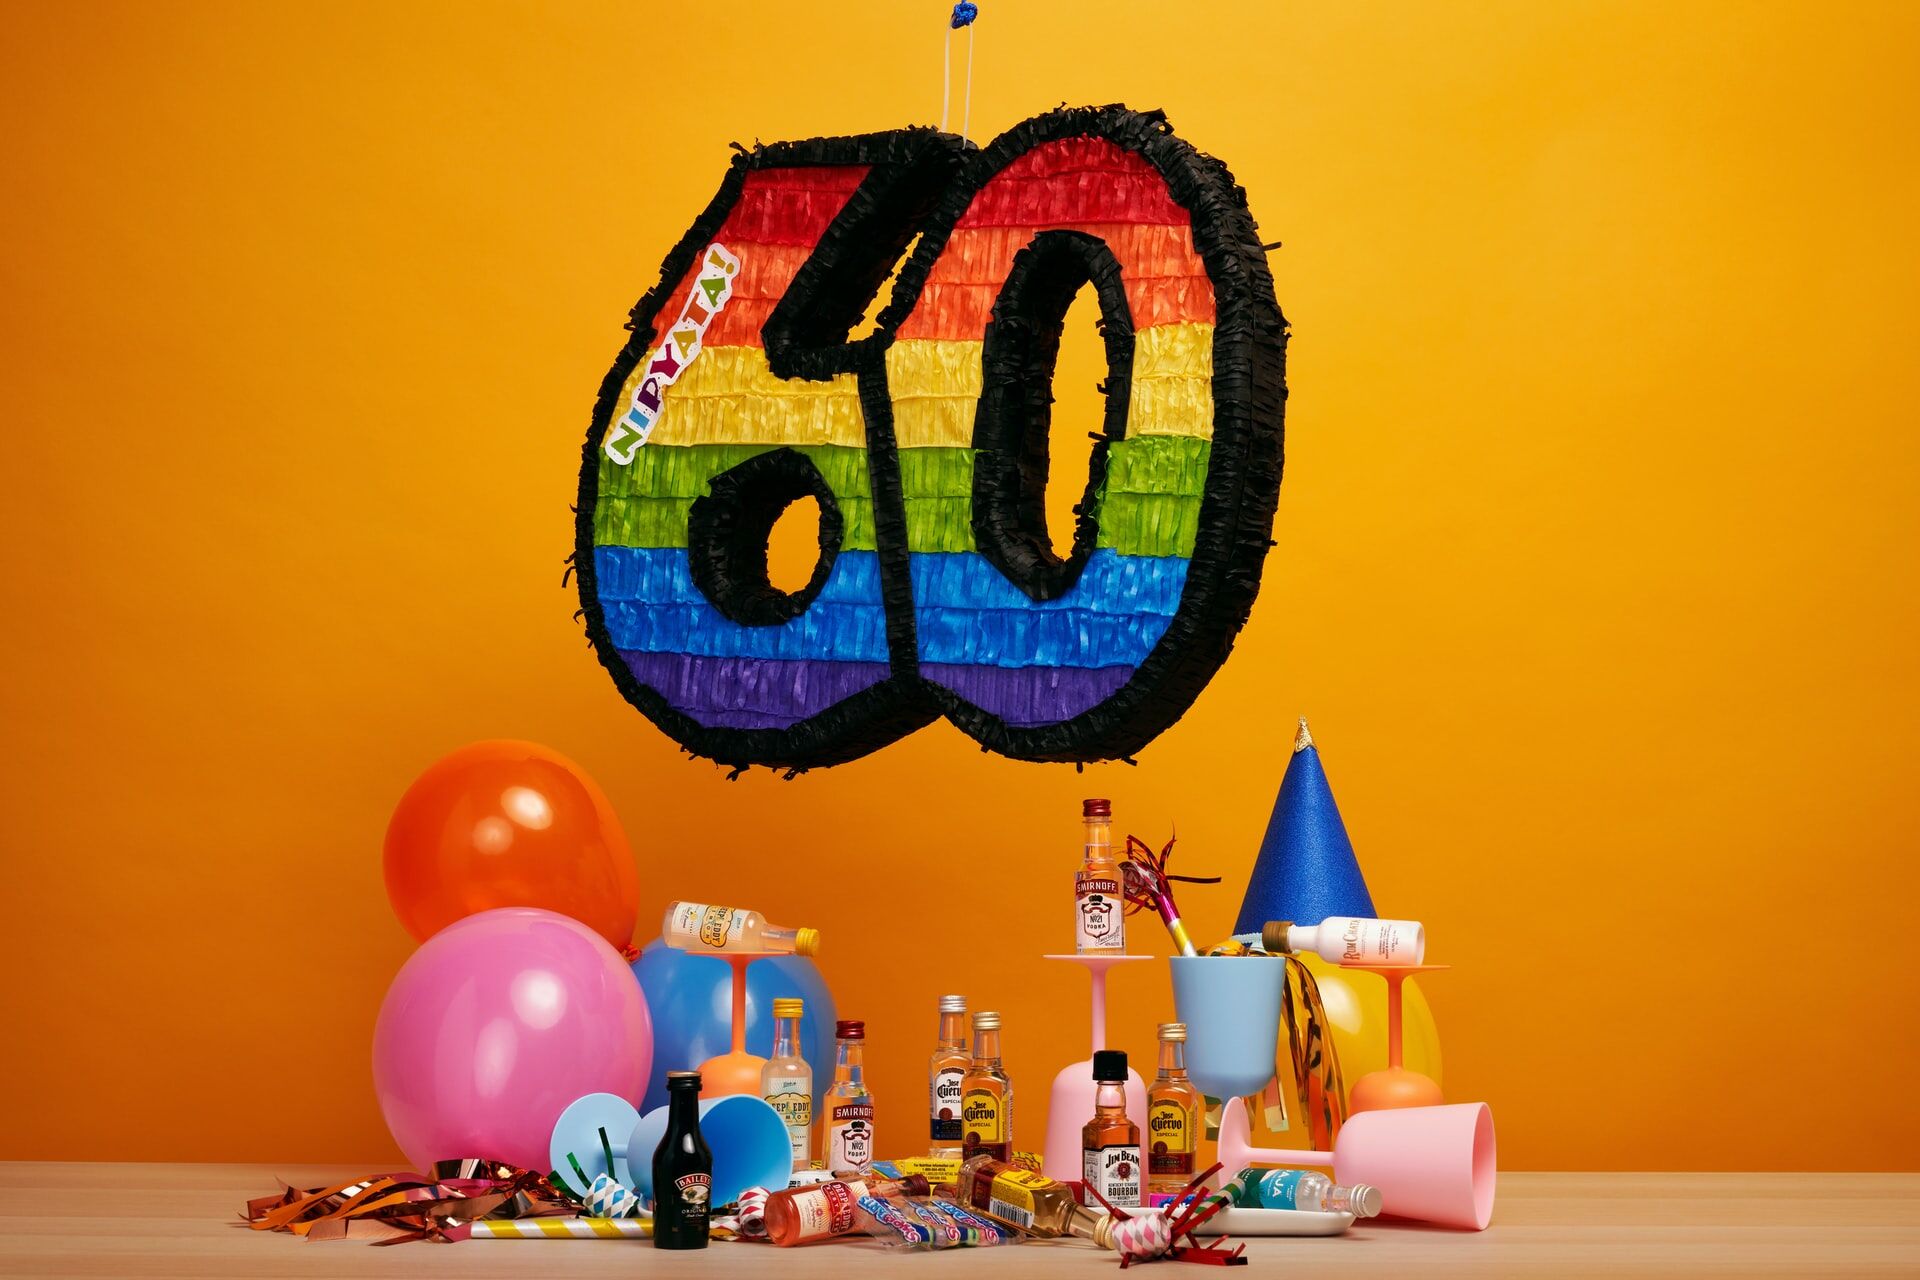 The Best 60th Birthday Ideas & Party Themes - The Bash